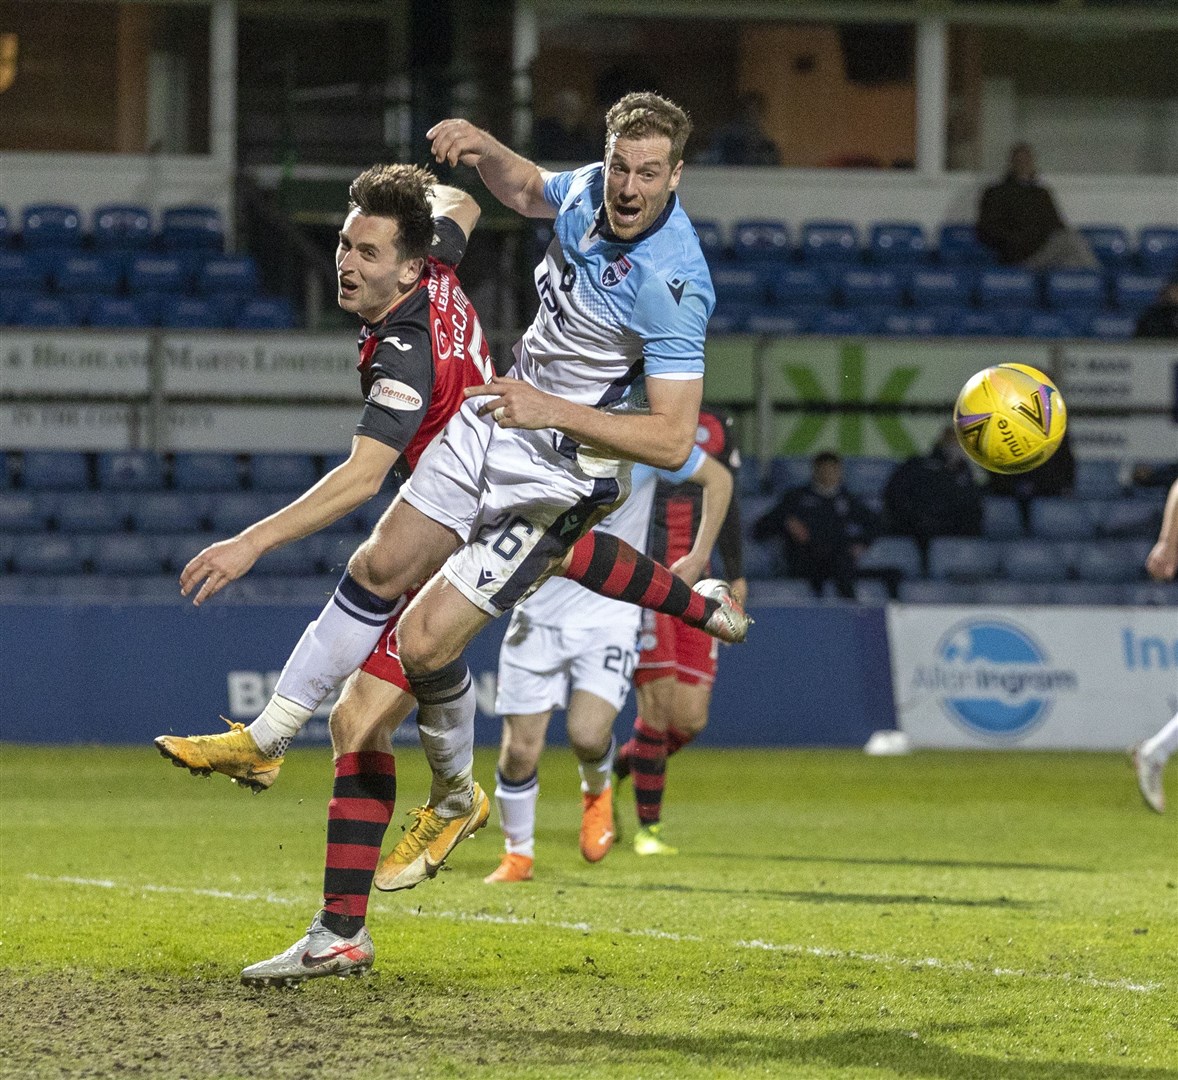 Picture - Ken Macpherson, Inverness. Ross County(1) v St.Mirren(3). 21.04.21. Ross County's Jordan White sees the ball headed clear past him by St.Mirren's Conor McCarthy.